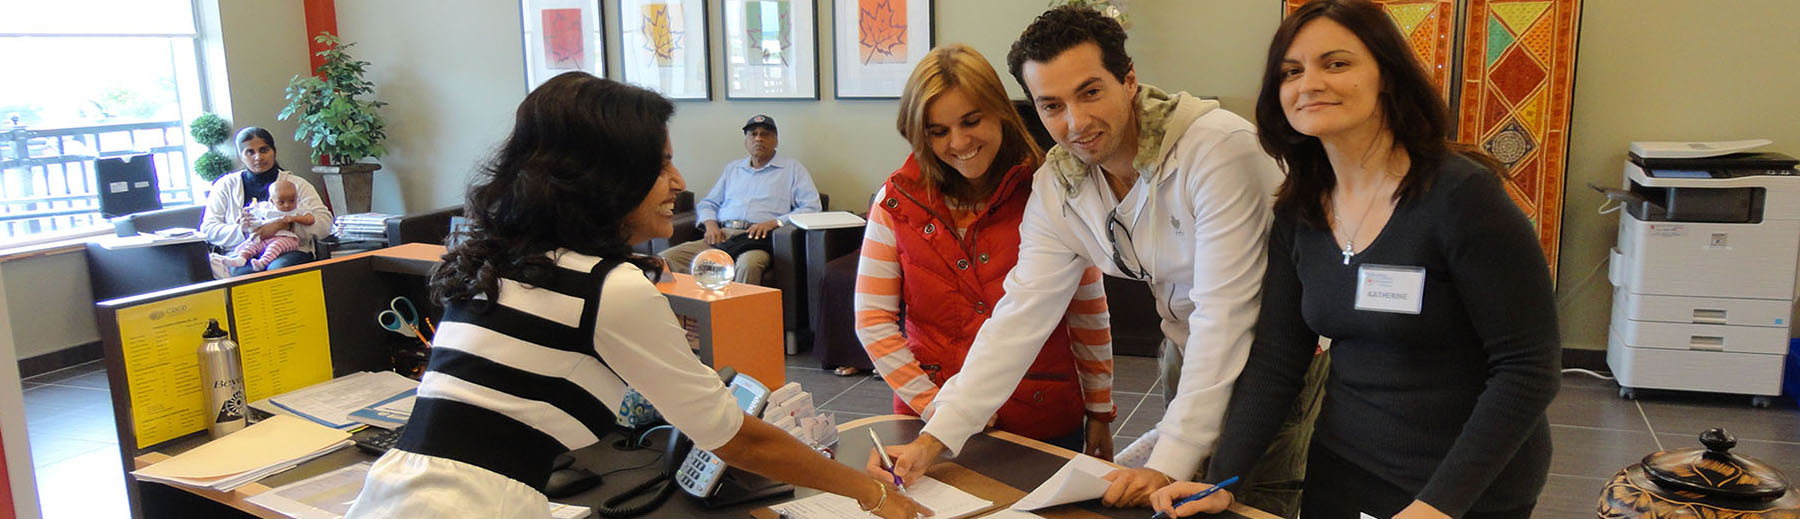 Newcomer clients visit the reception desk at the Welcome Centre